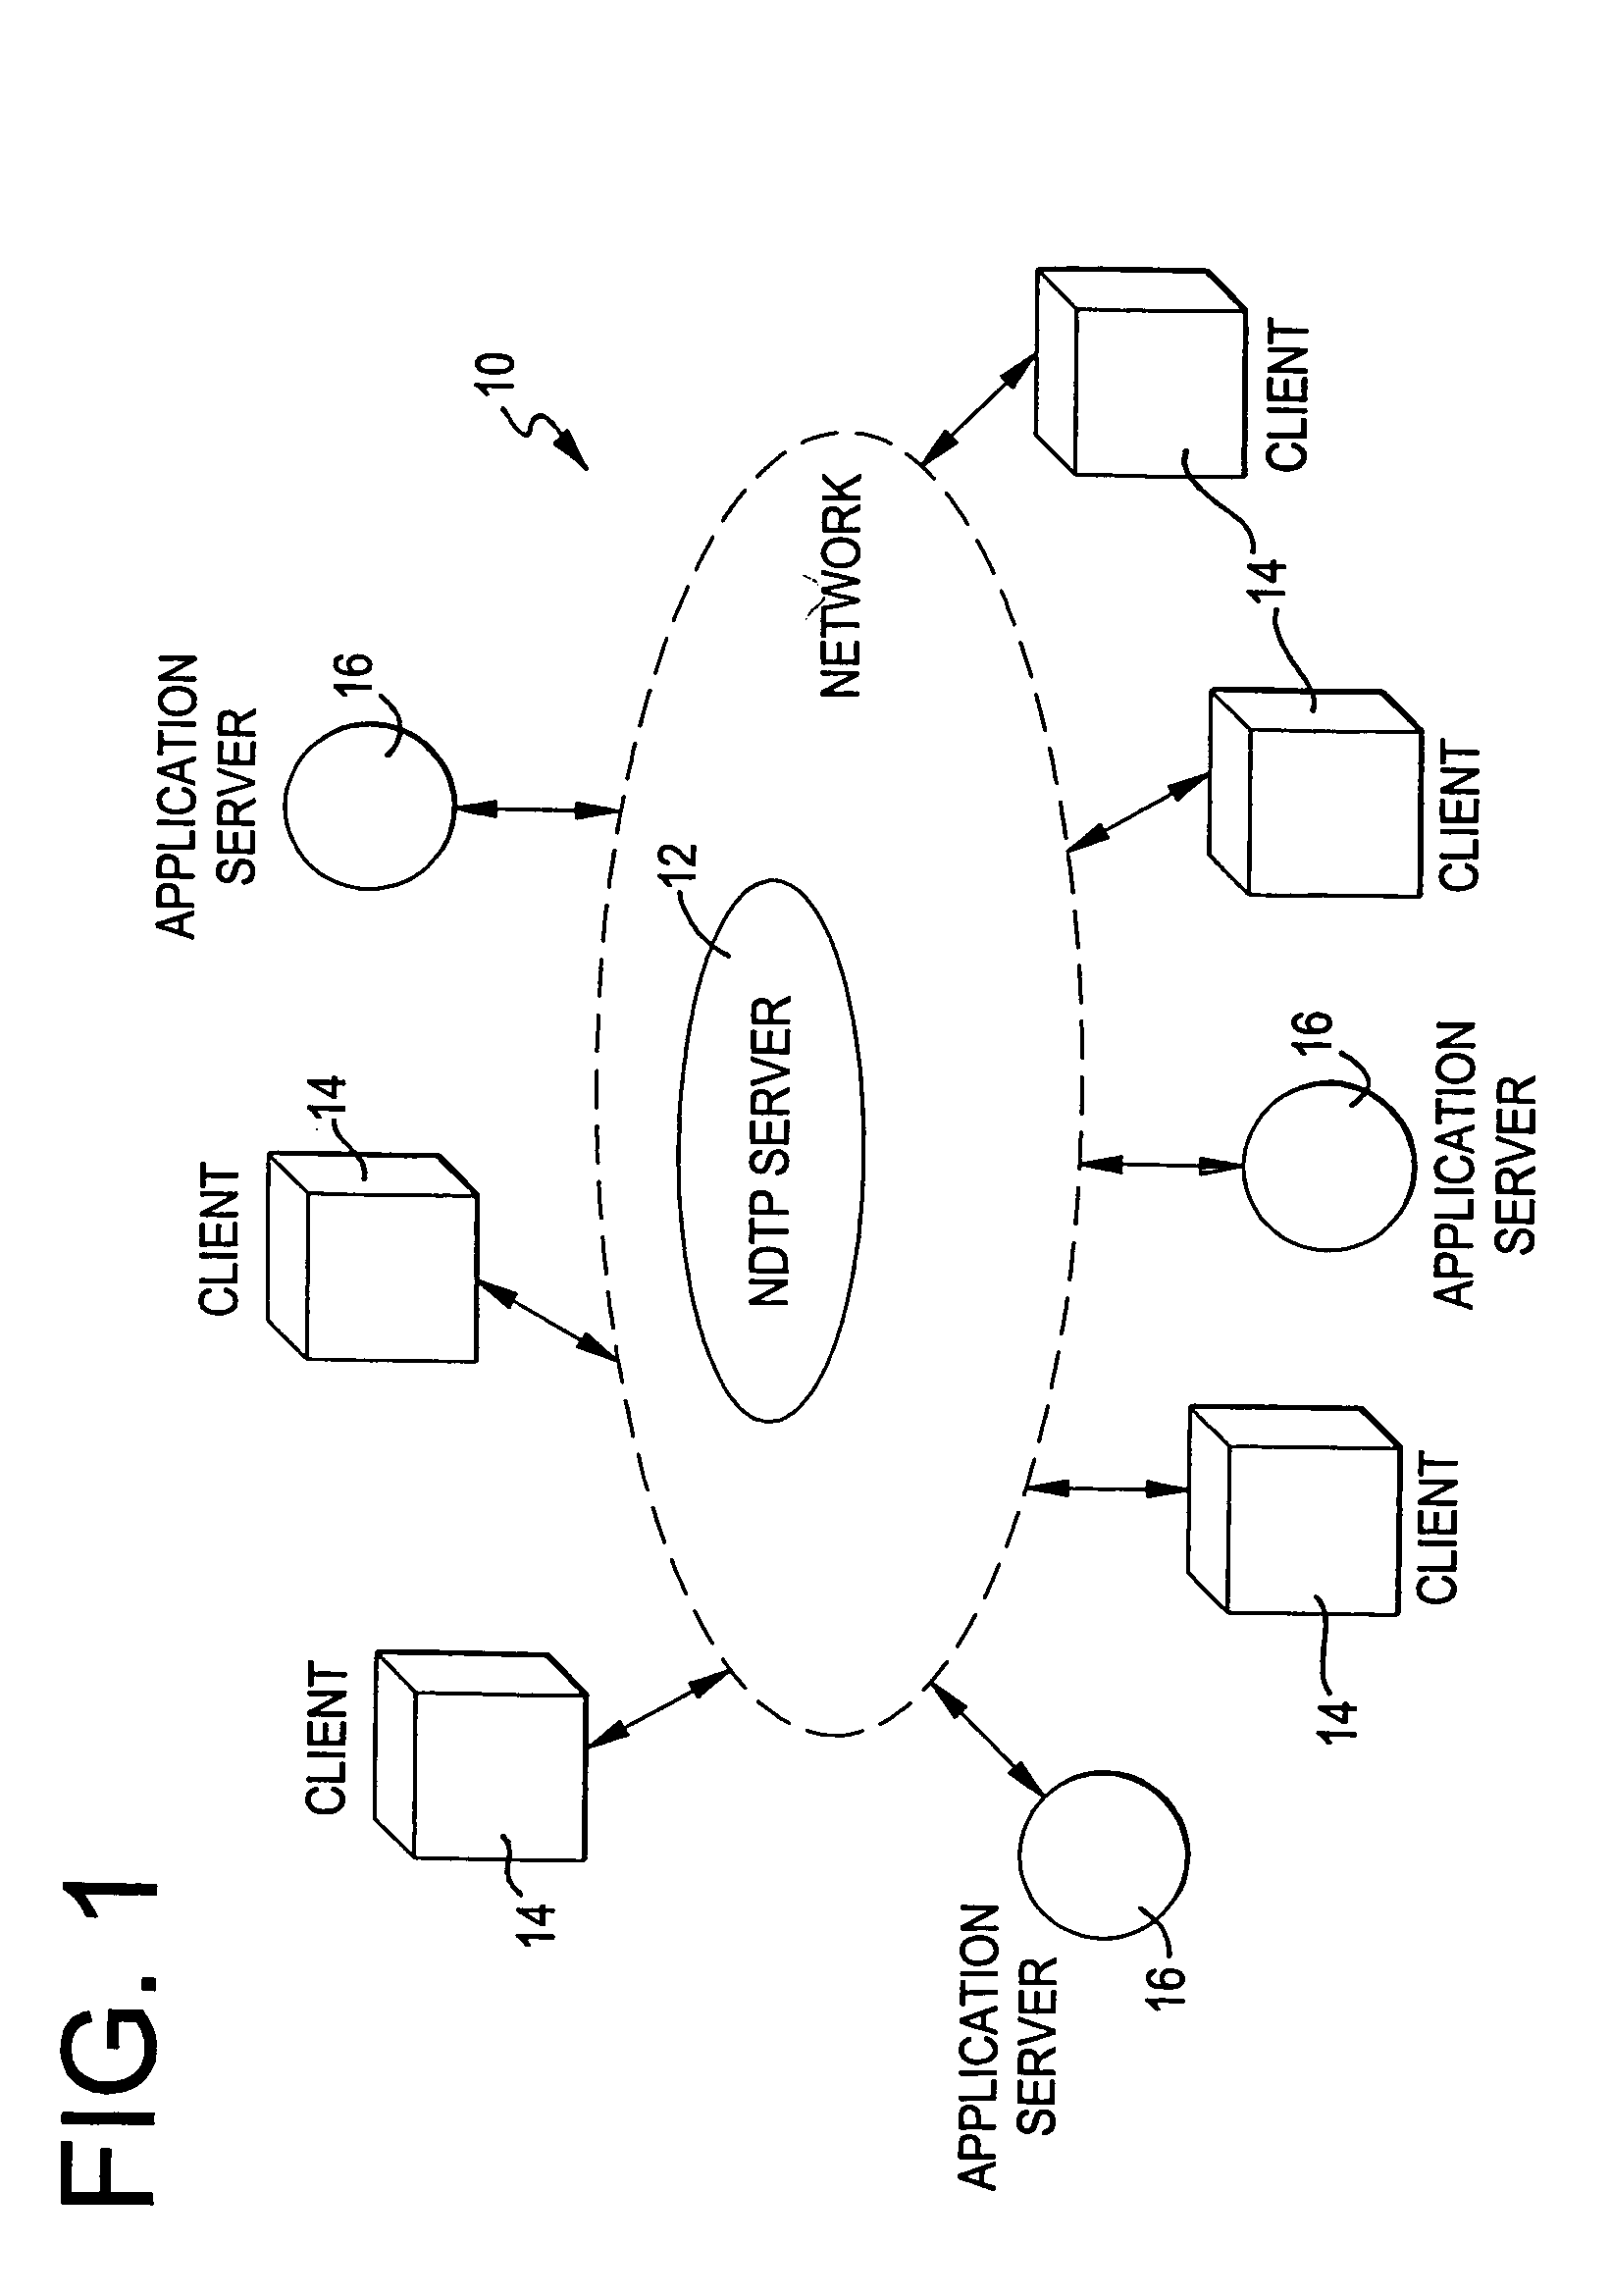 Method and apparatus for managing location information in a network separate from the data to which the location information pertains